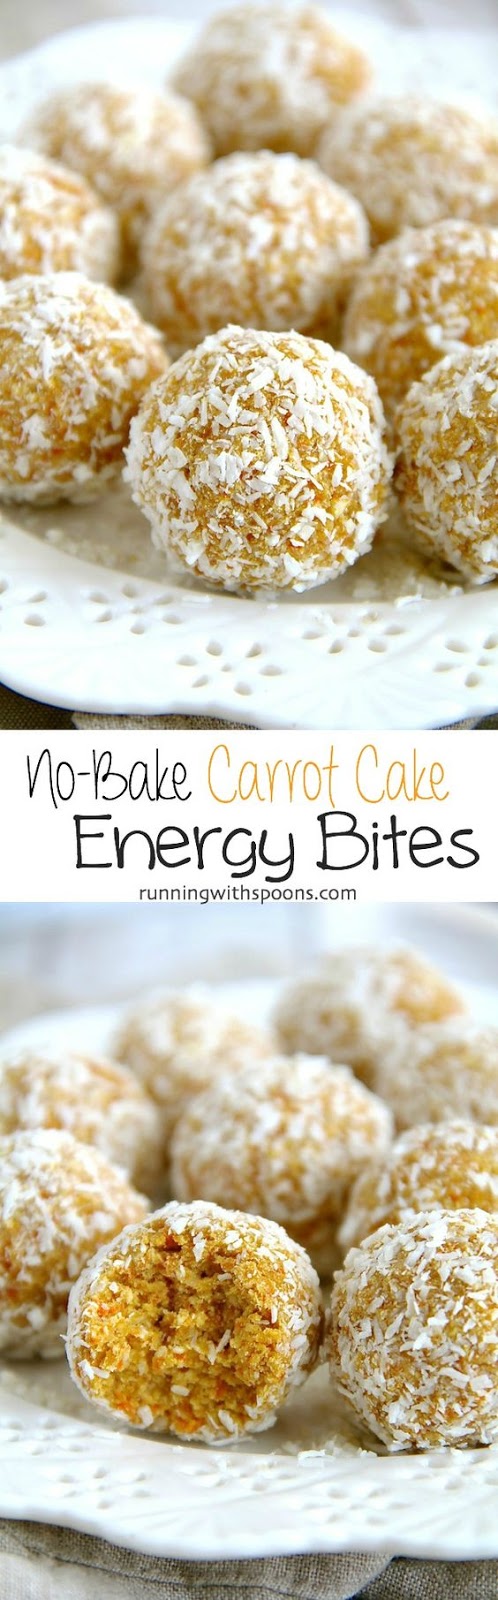 10 minutes and 1 bowl are all you need to whip up these healthy No-Bake Carrot Cake Energy Bites! They're nut-free, gluten-free, and vegan.